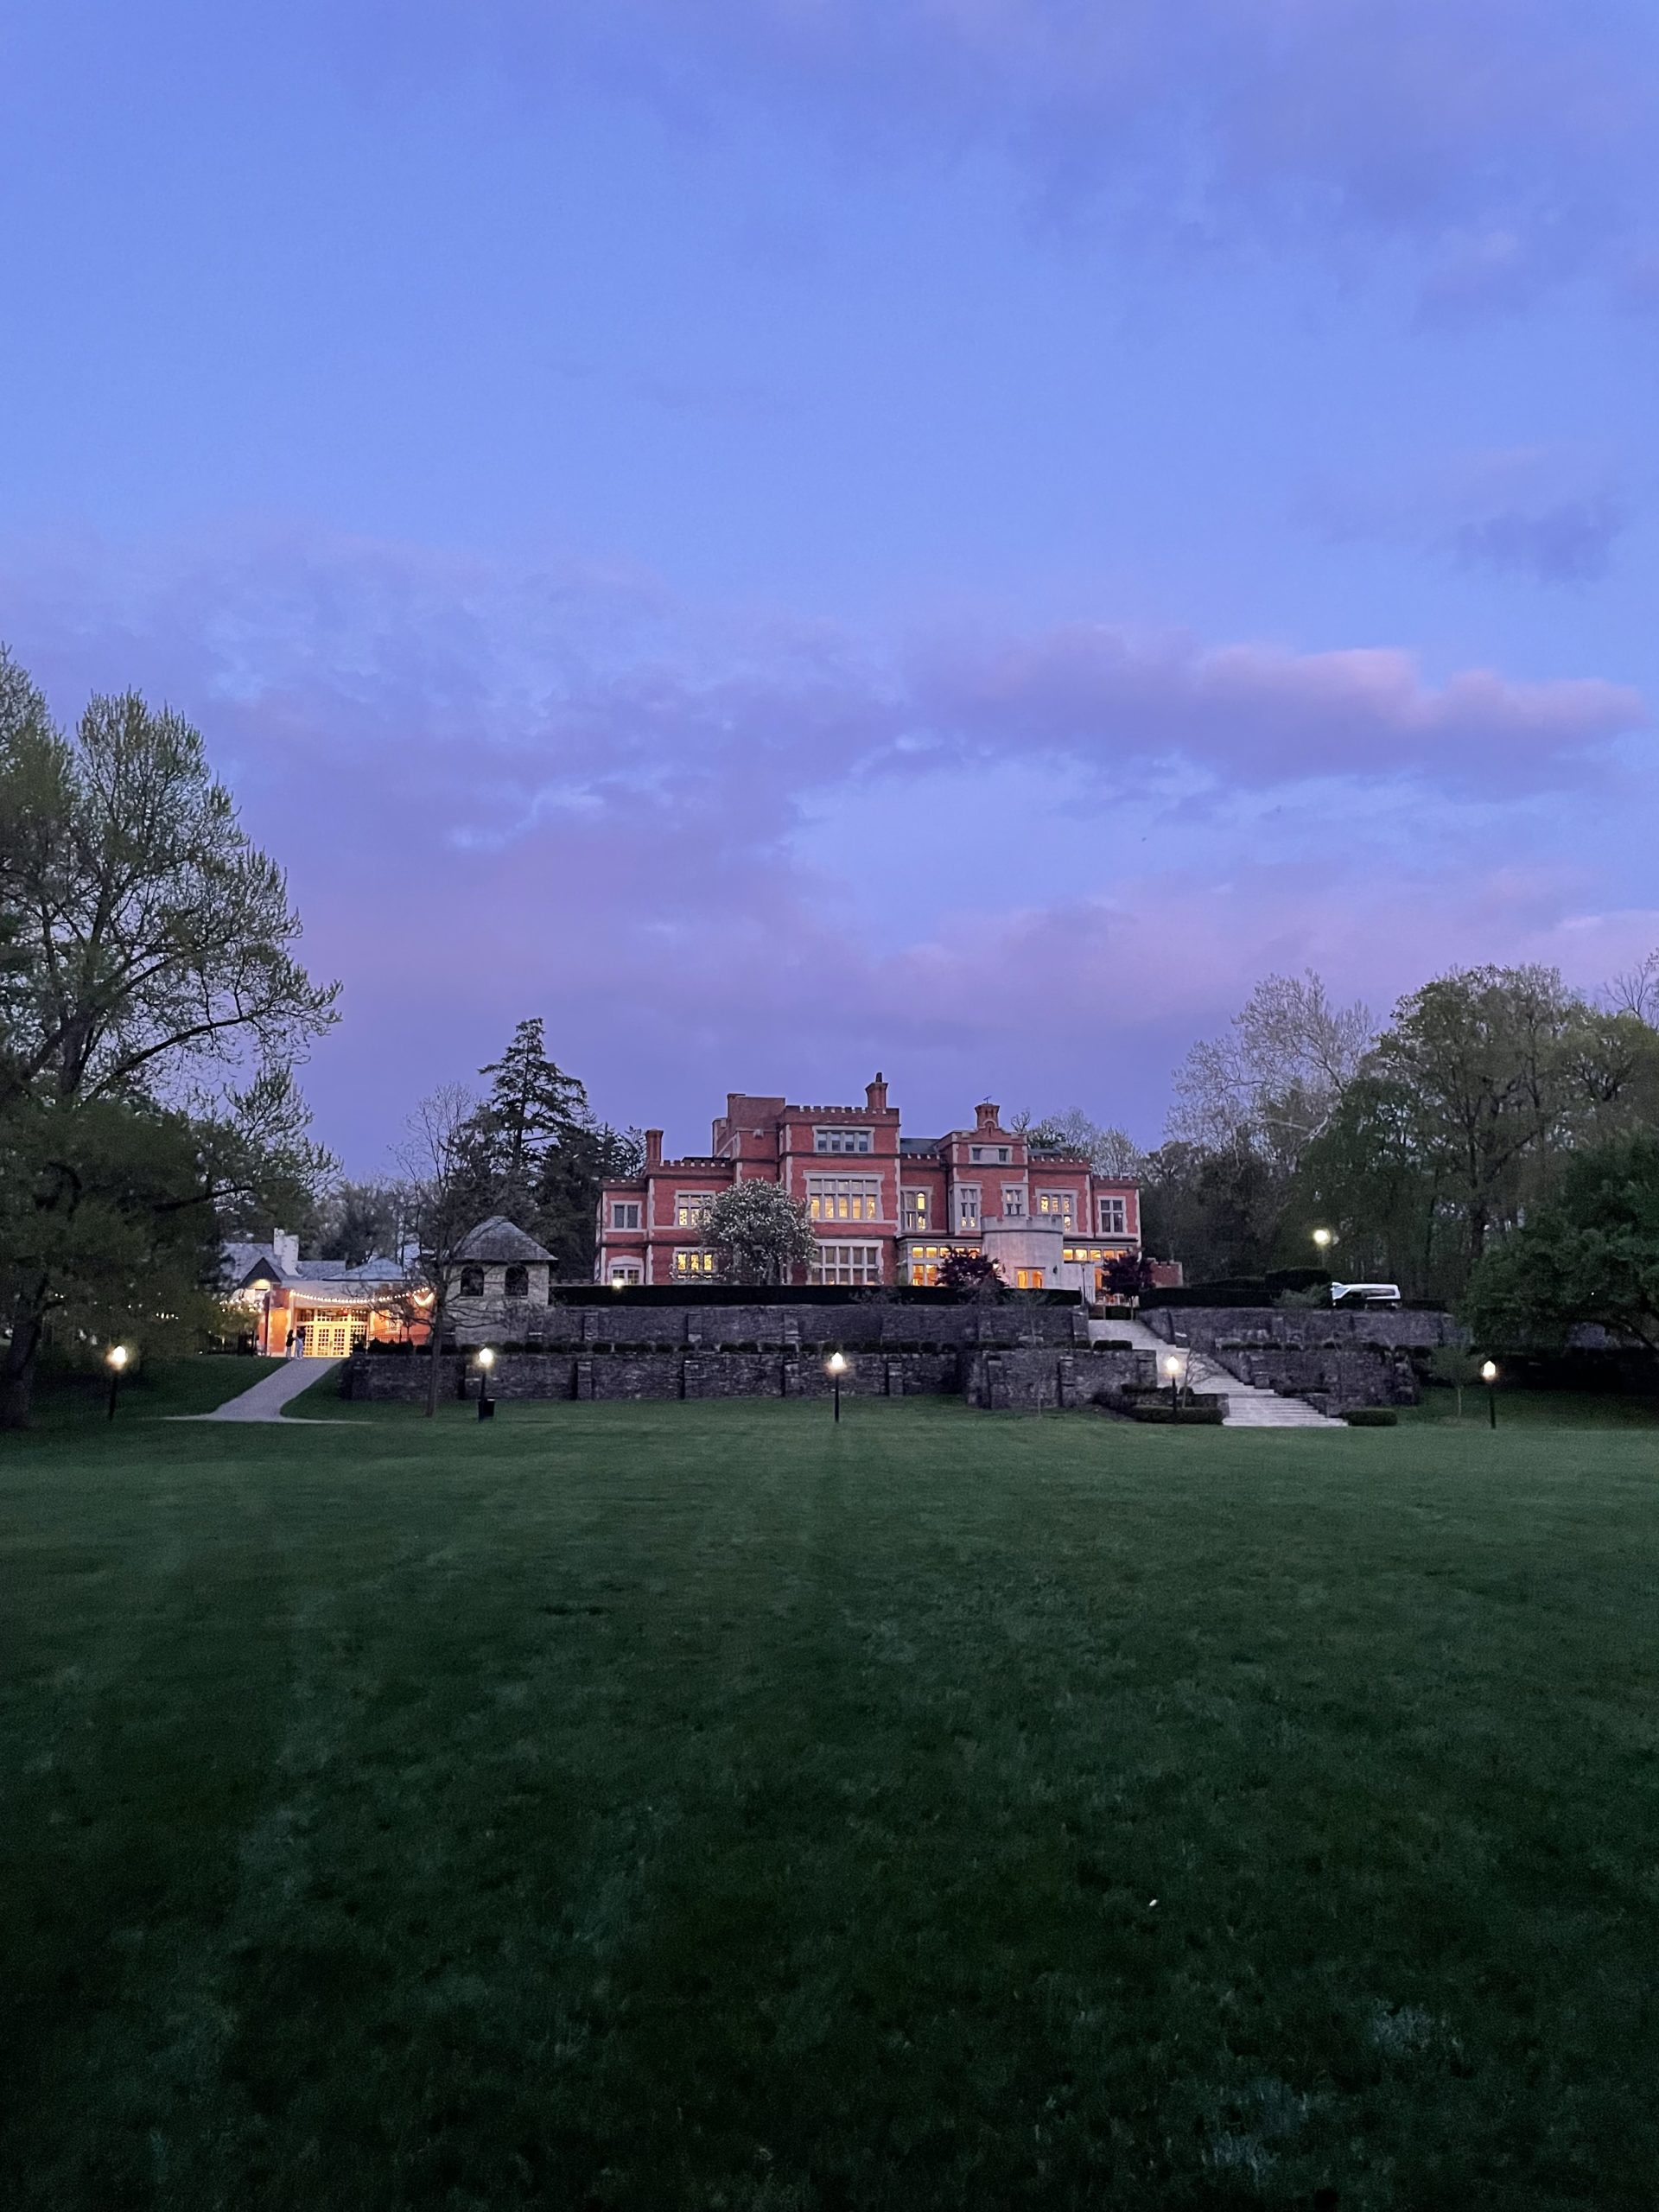 A brick mansion sits on a dark green grassy hill under a sunset sky of blue, purple, and pink clouds.